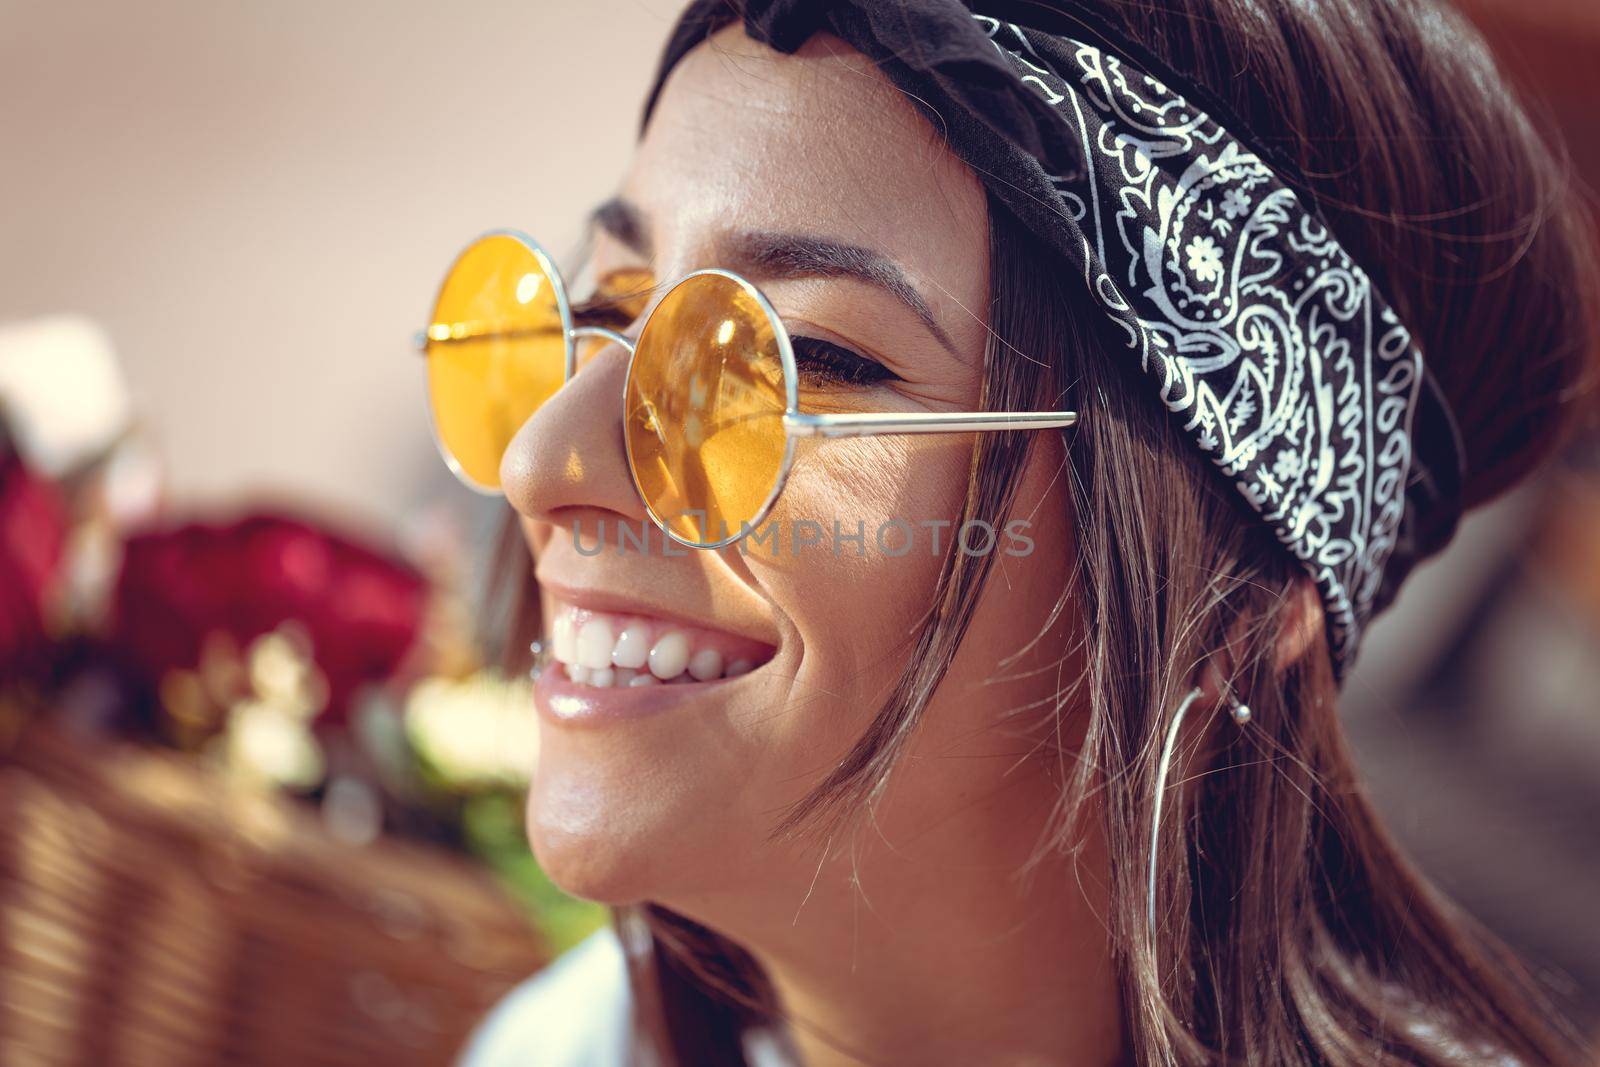 Portrait of a happy smiling young woman with sunglasses who is enjoying in a summer sunny day.